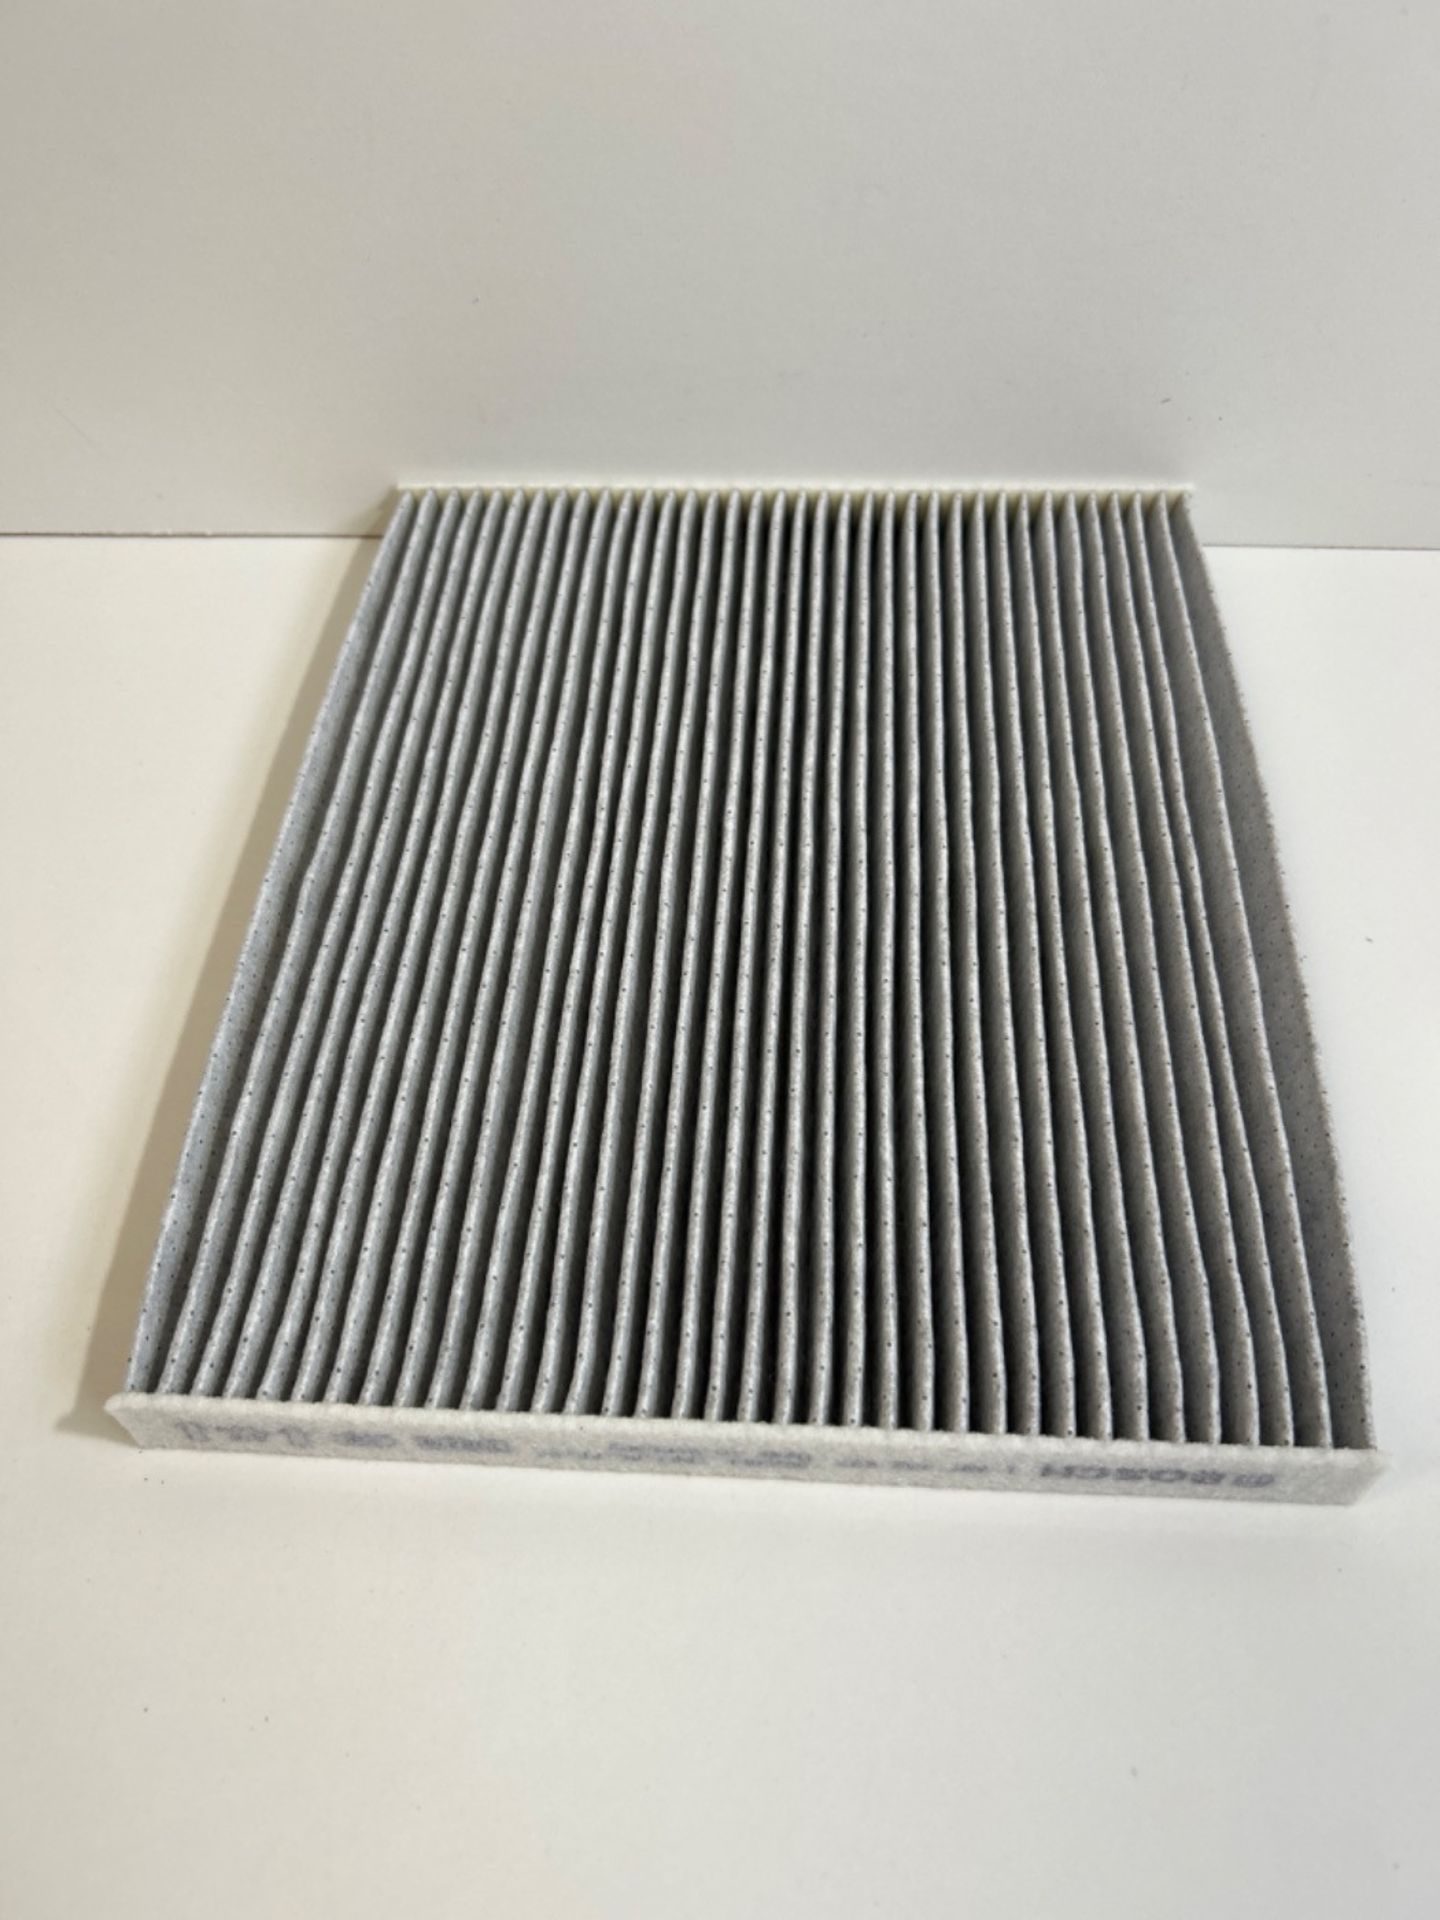 Bosch R2537 - Cabin Filter activated-carbon - Image 3 of 3